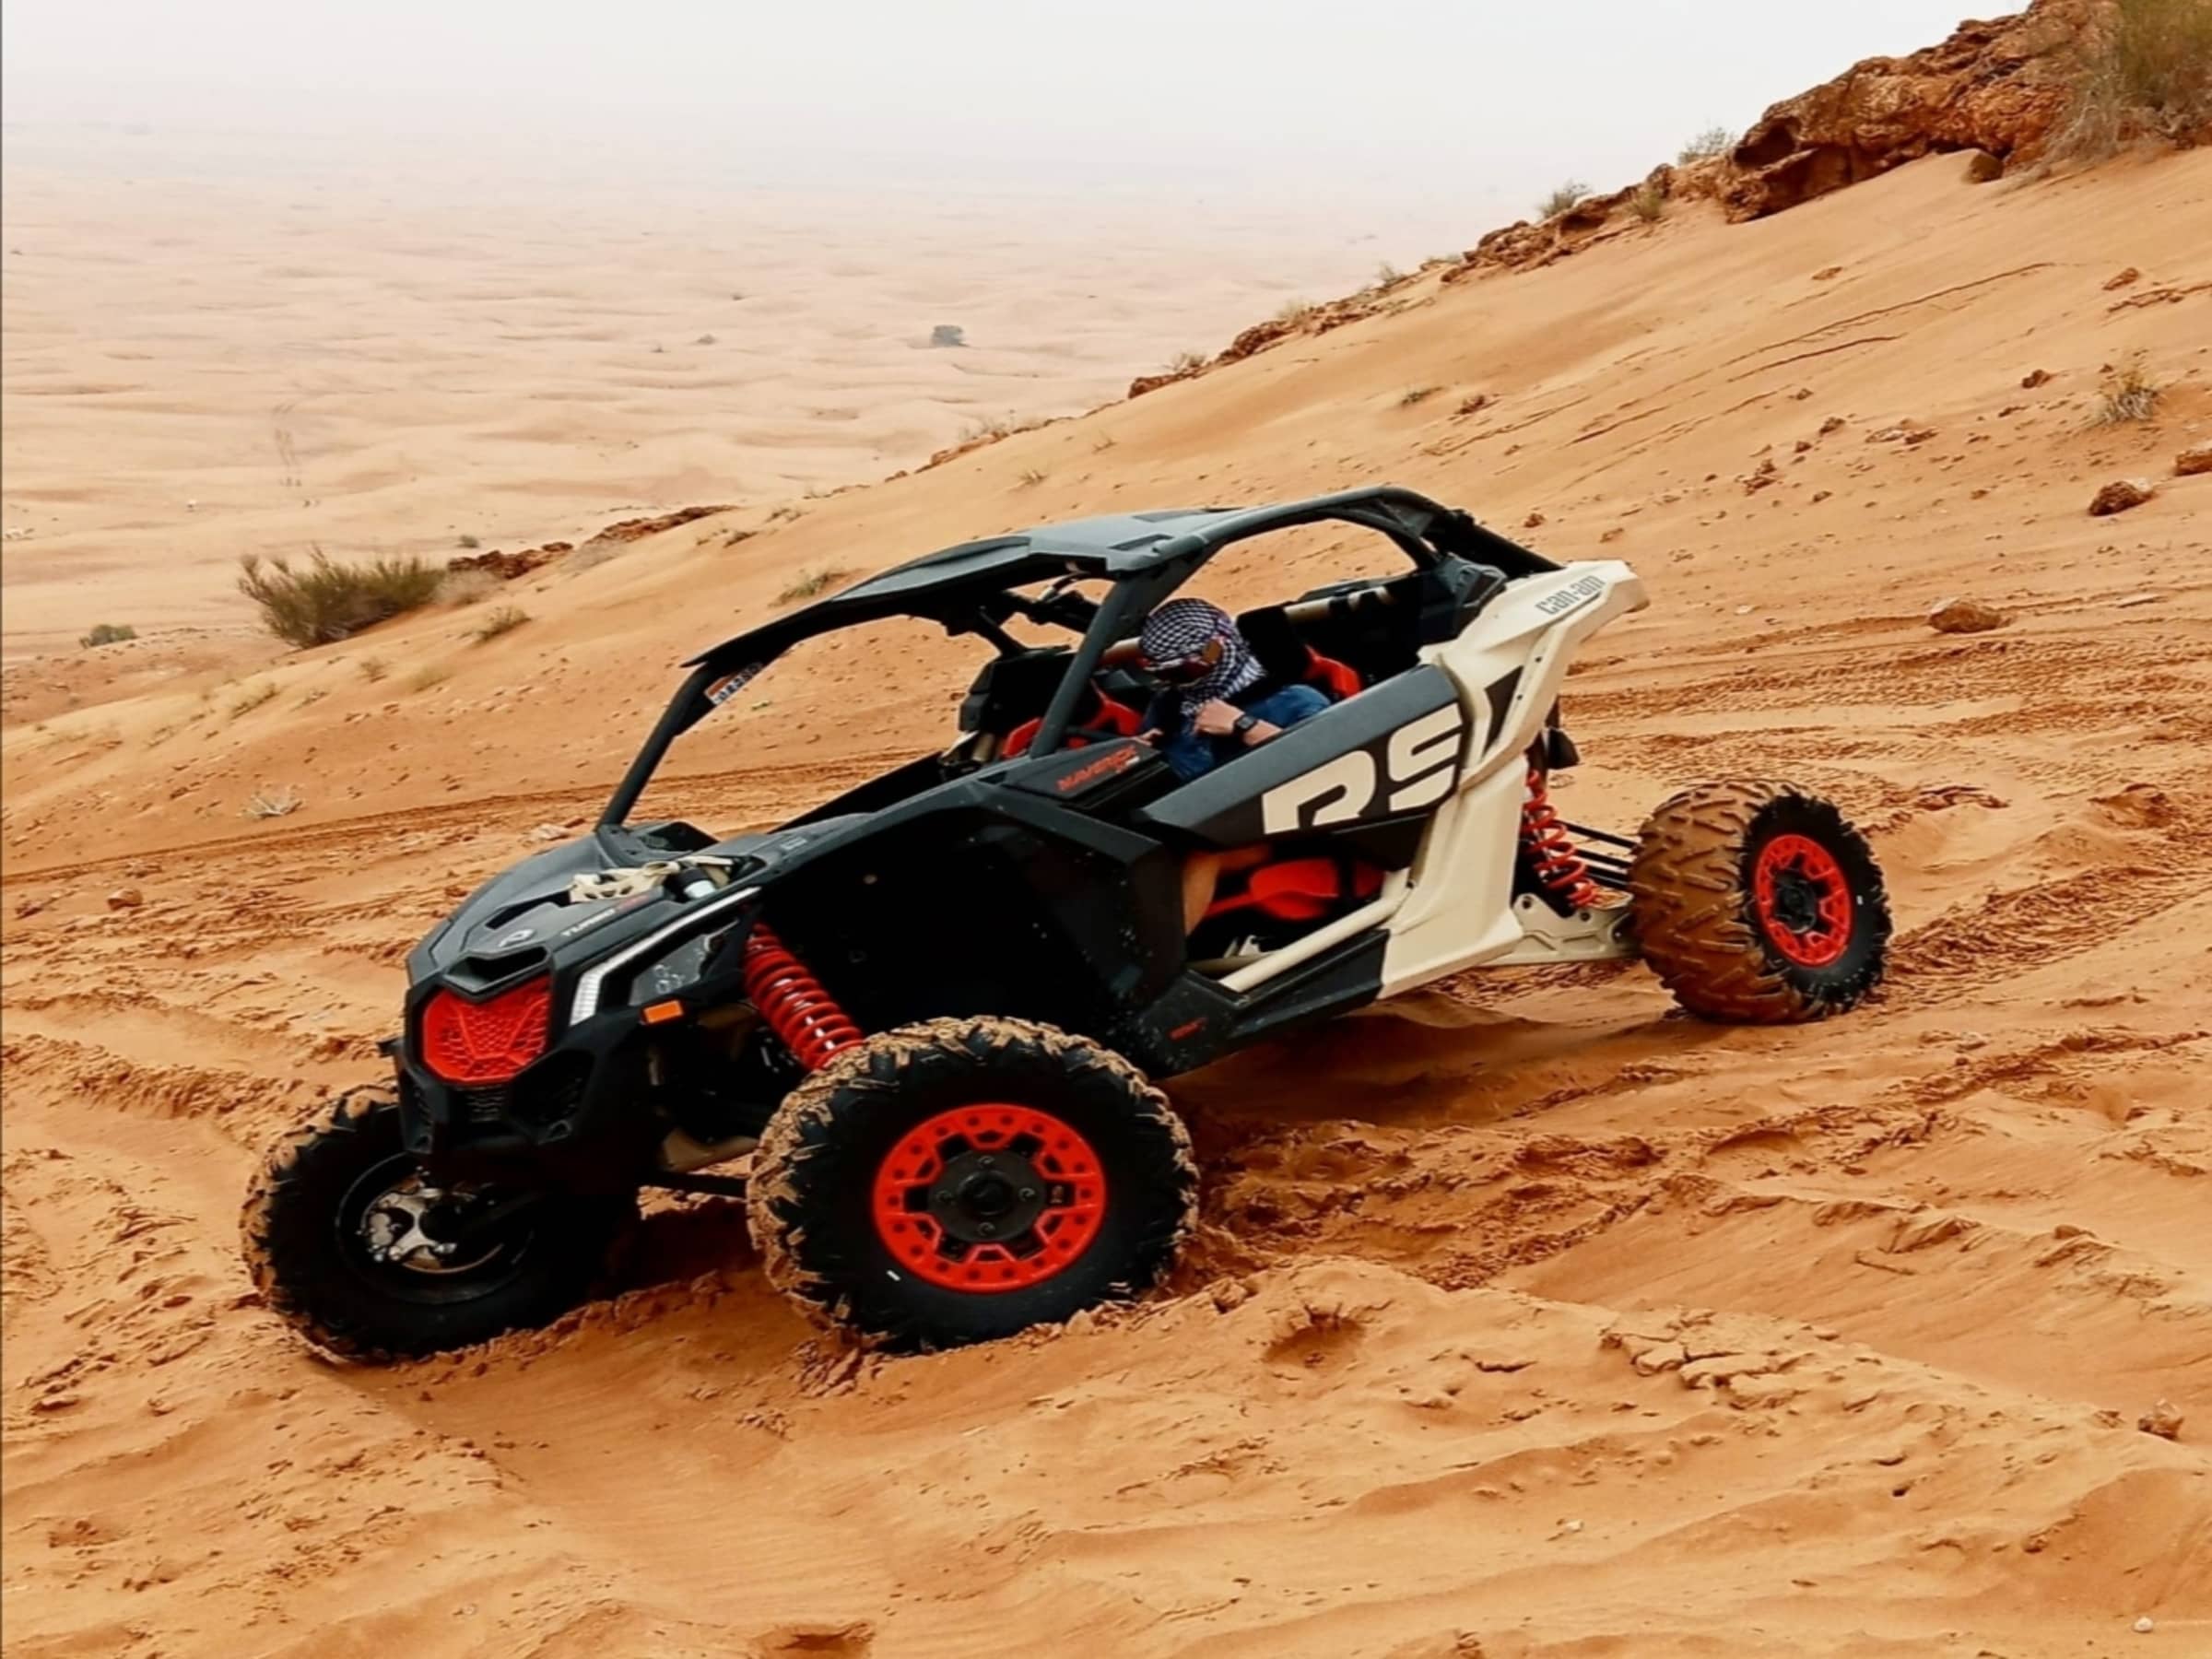 Read more about the article Dubai Buggy Tour and 4 More Adventures to Do in Dubai